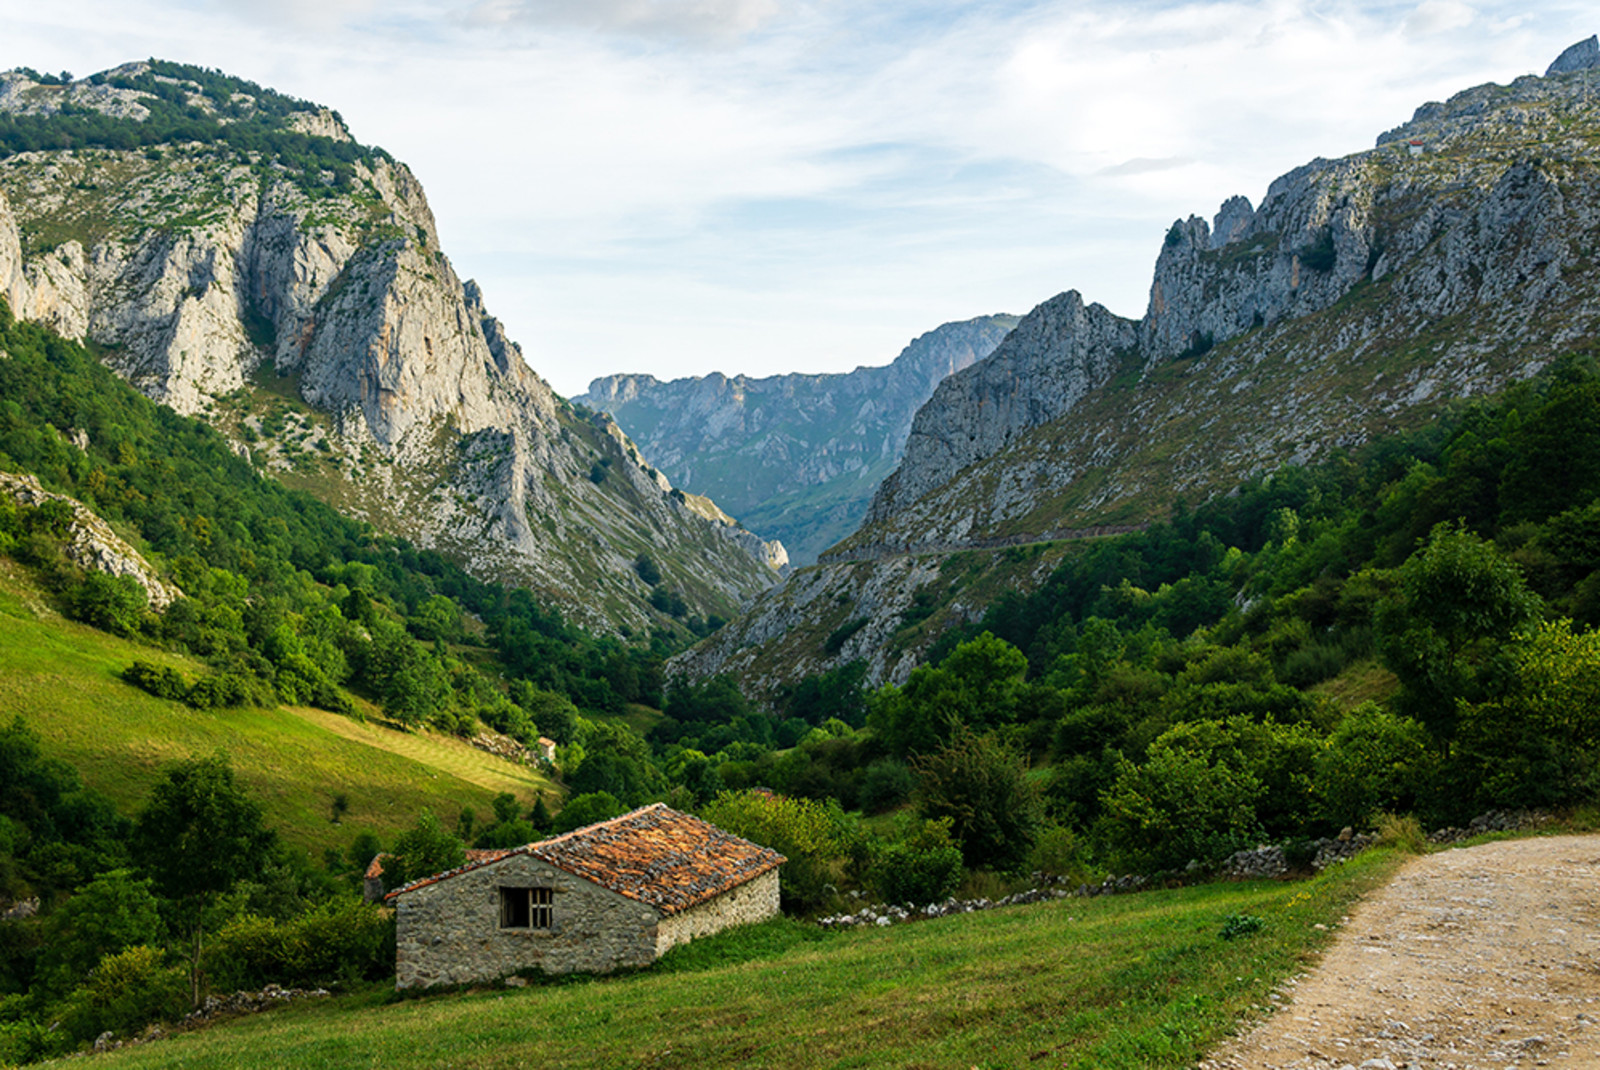 The Perfect 7 Days in Asturias, Spain  - Day 6: Rafting and trekking Covadonga Lakes